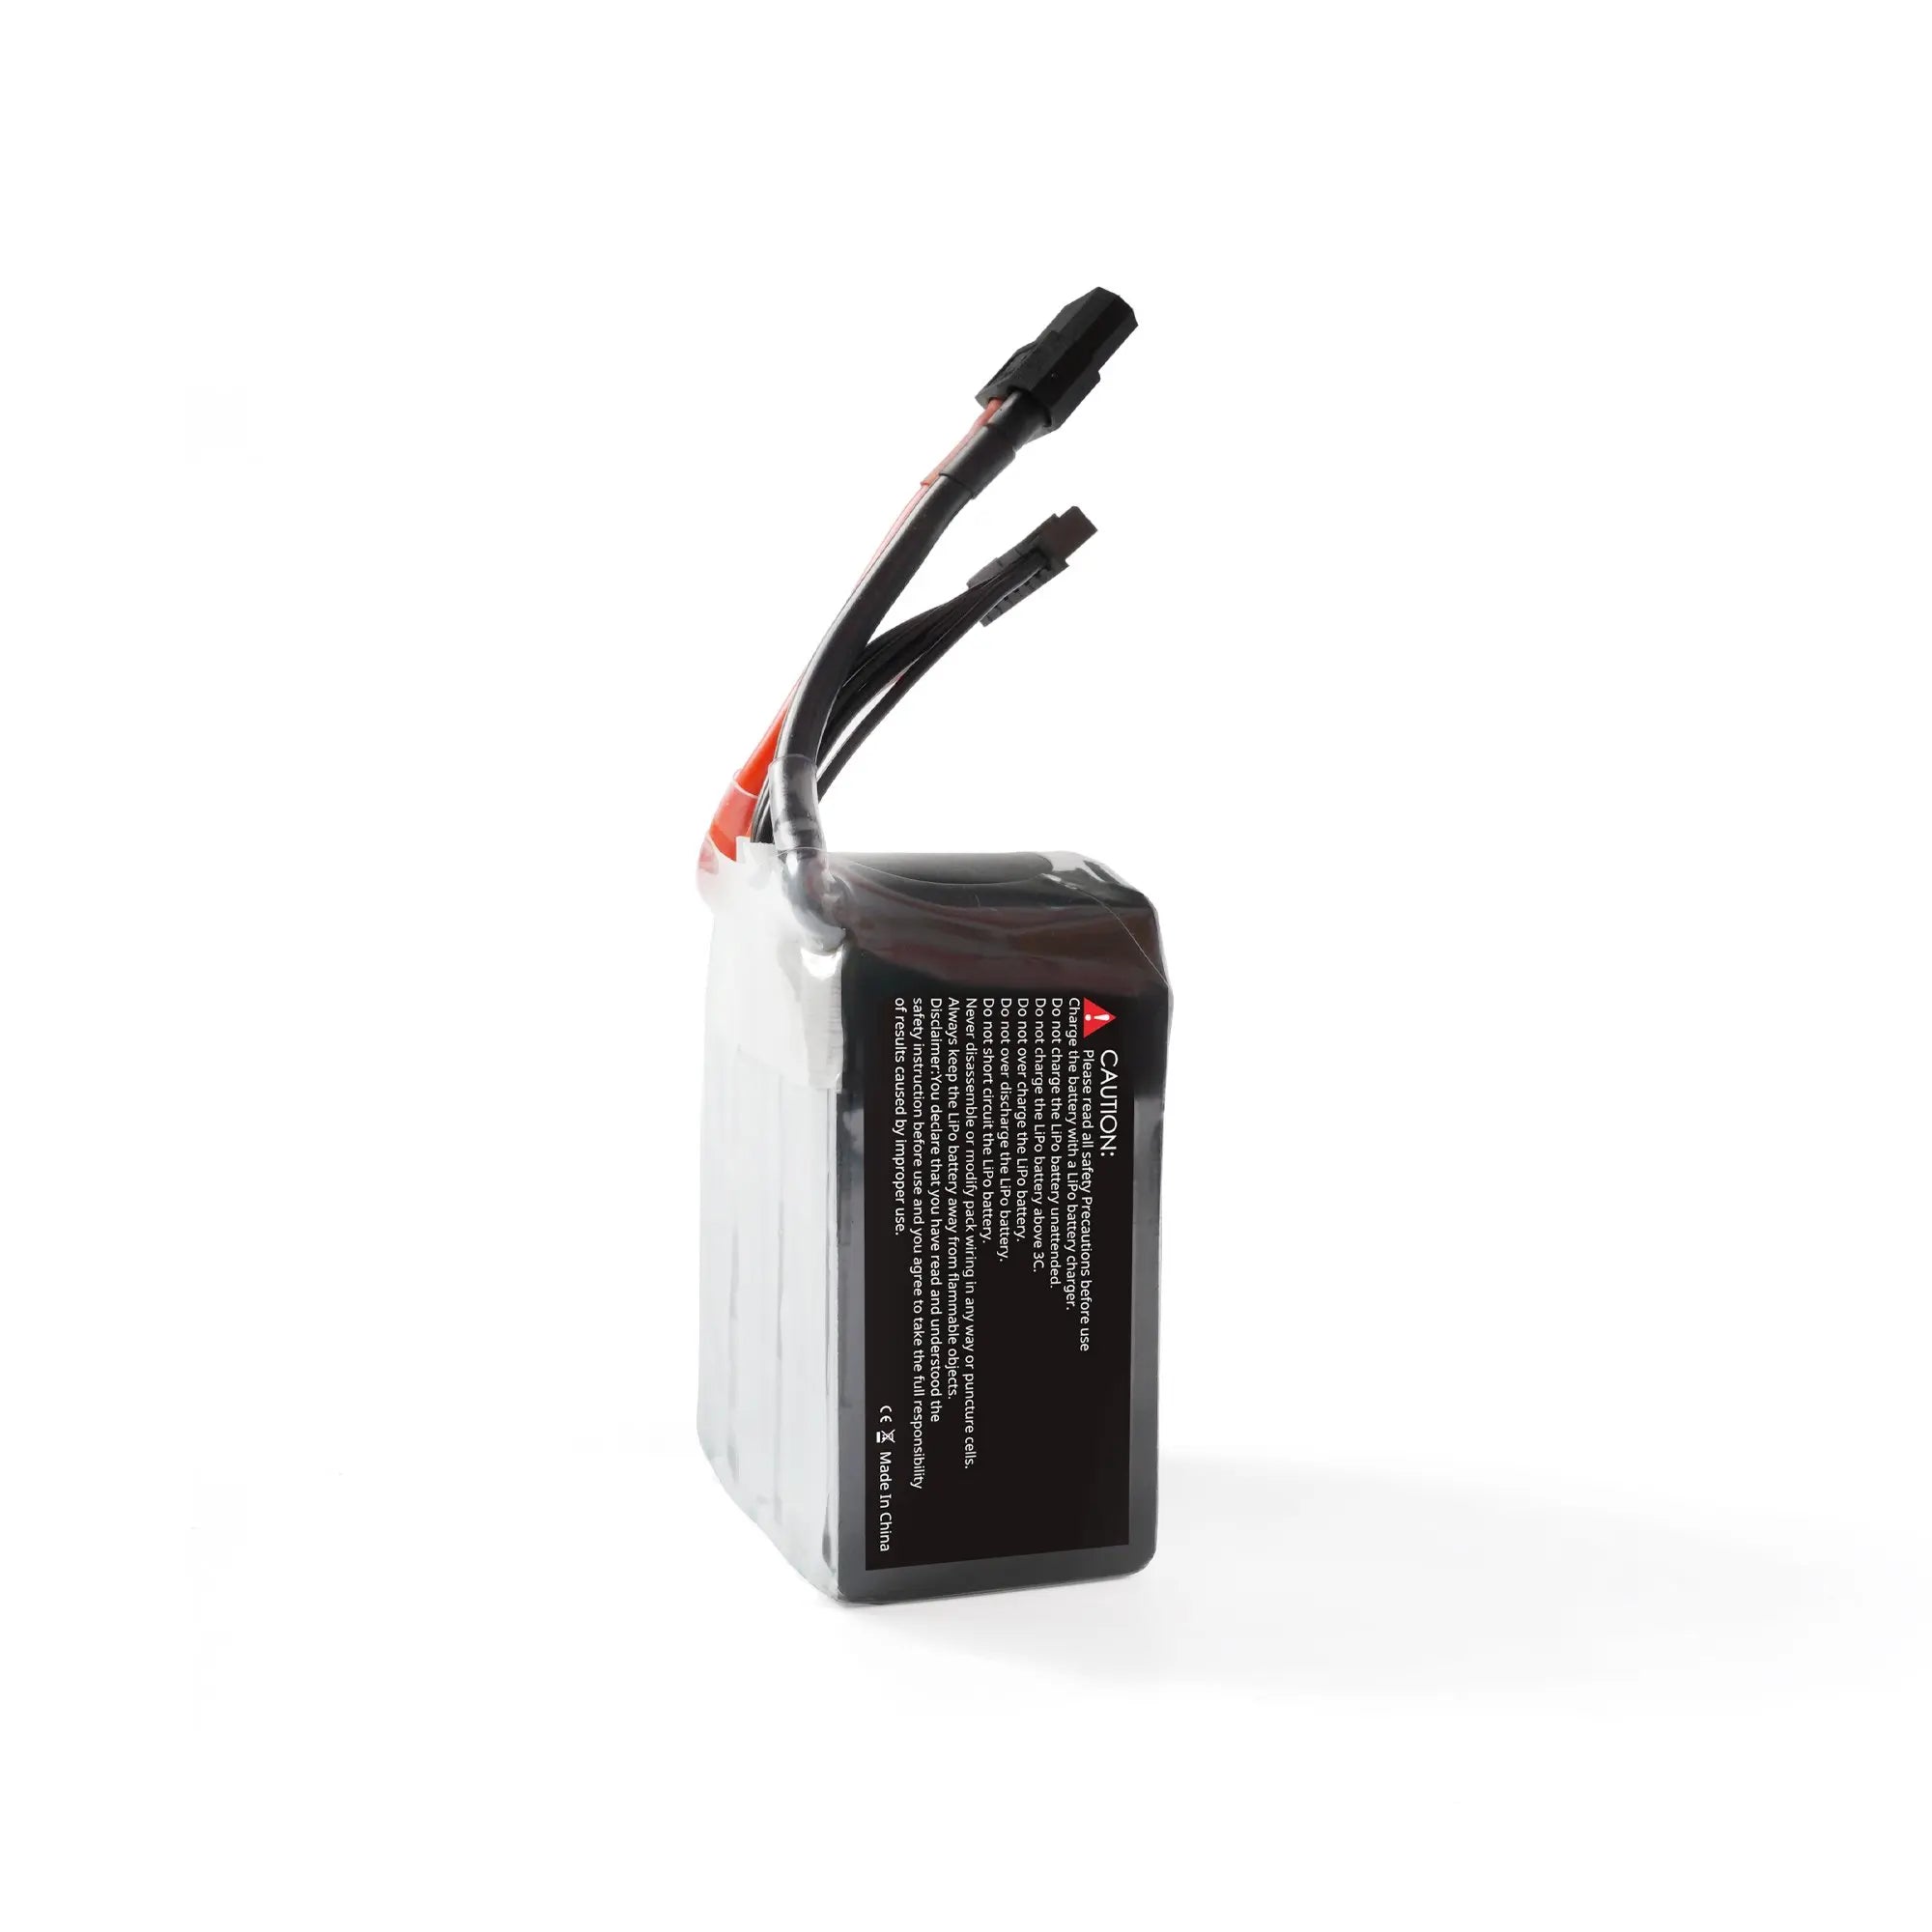 GEPRC Storm 6S 2000mAh 120C Lipo Battery, we've been pursuing smaller size, lighter weight, more power and higher capacity FP